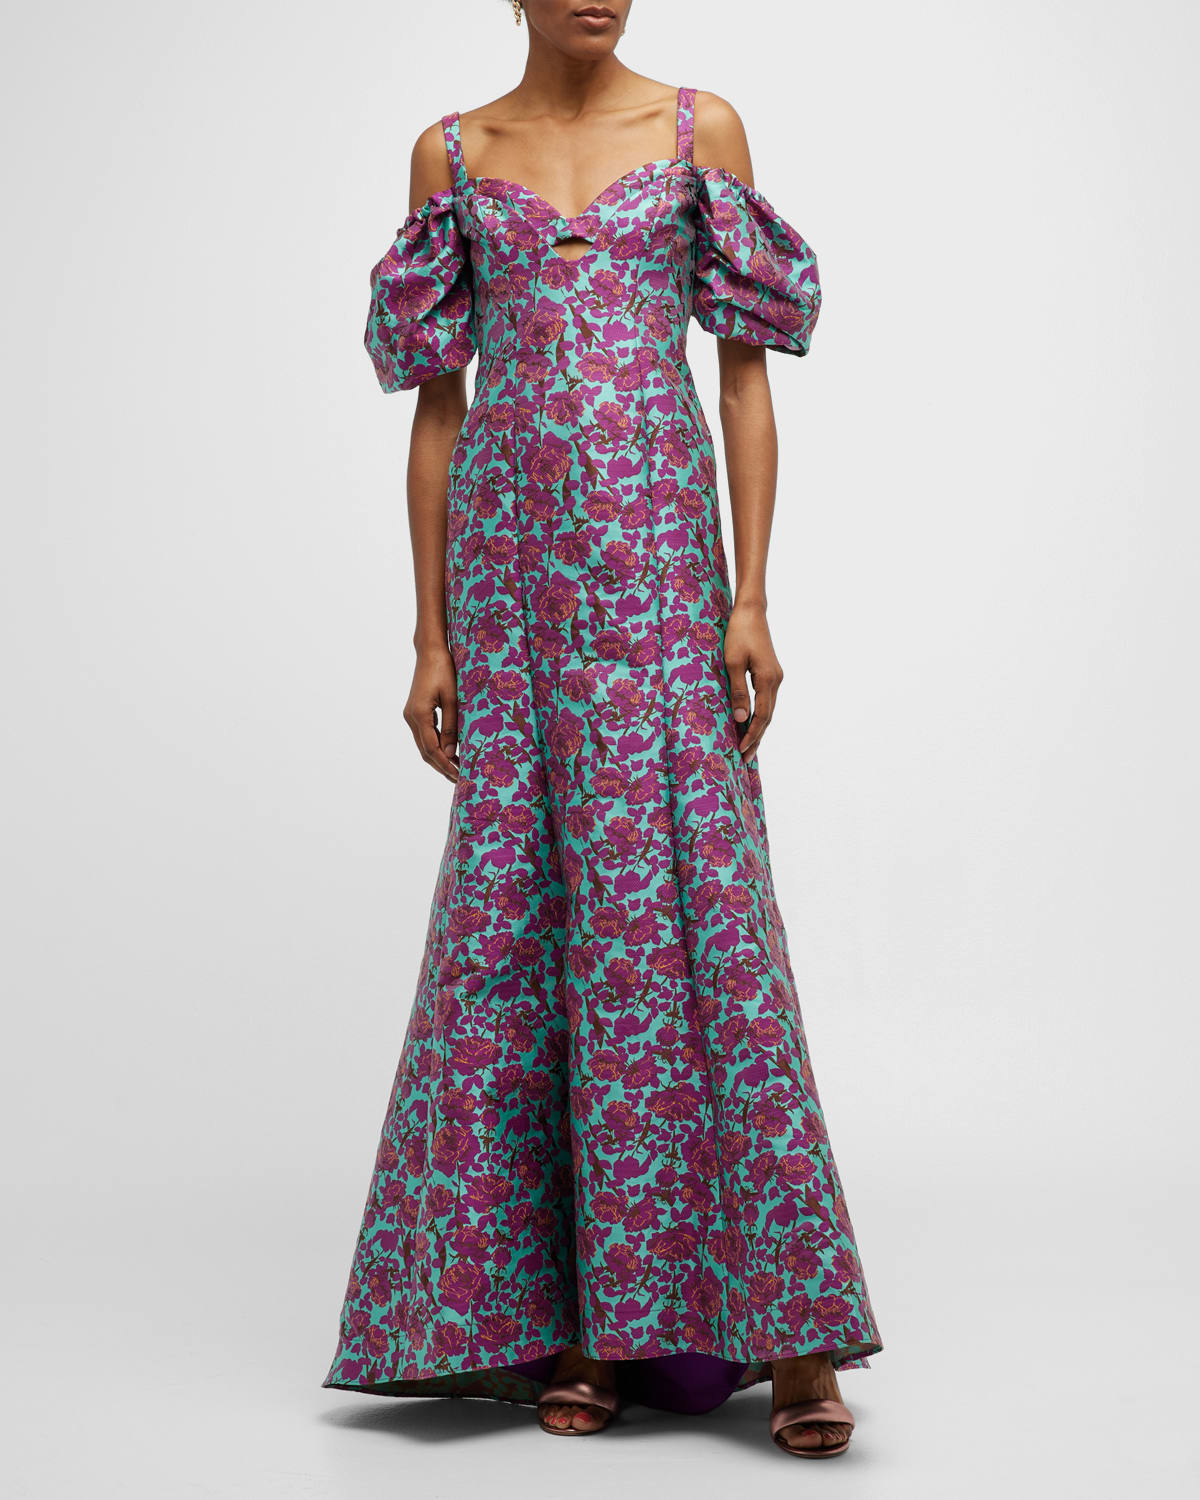 ZAC POSEN FLORAL JACQUARD COLD-SHOULDER SWEETHEART GOWN